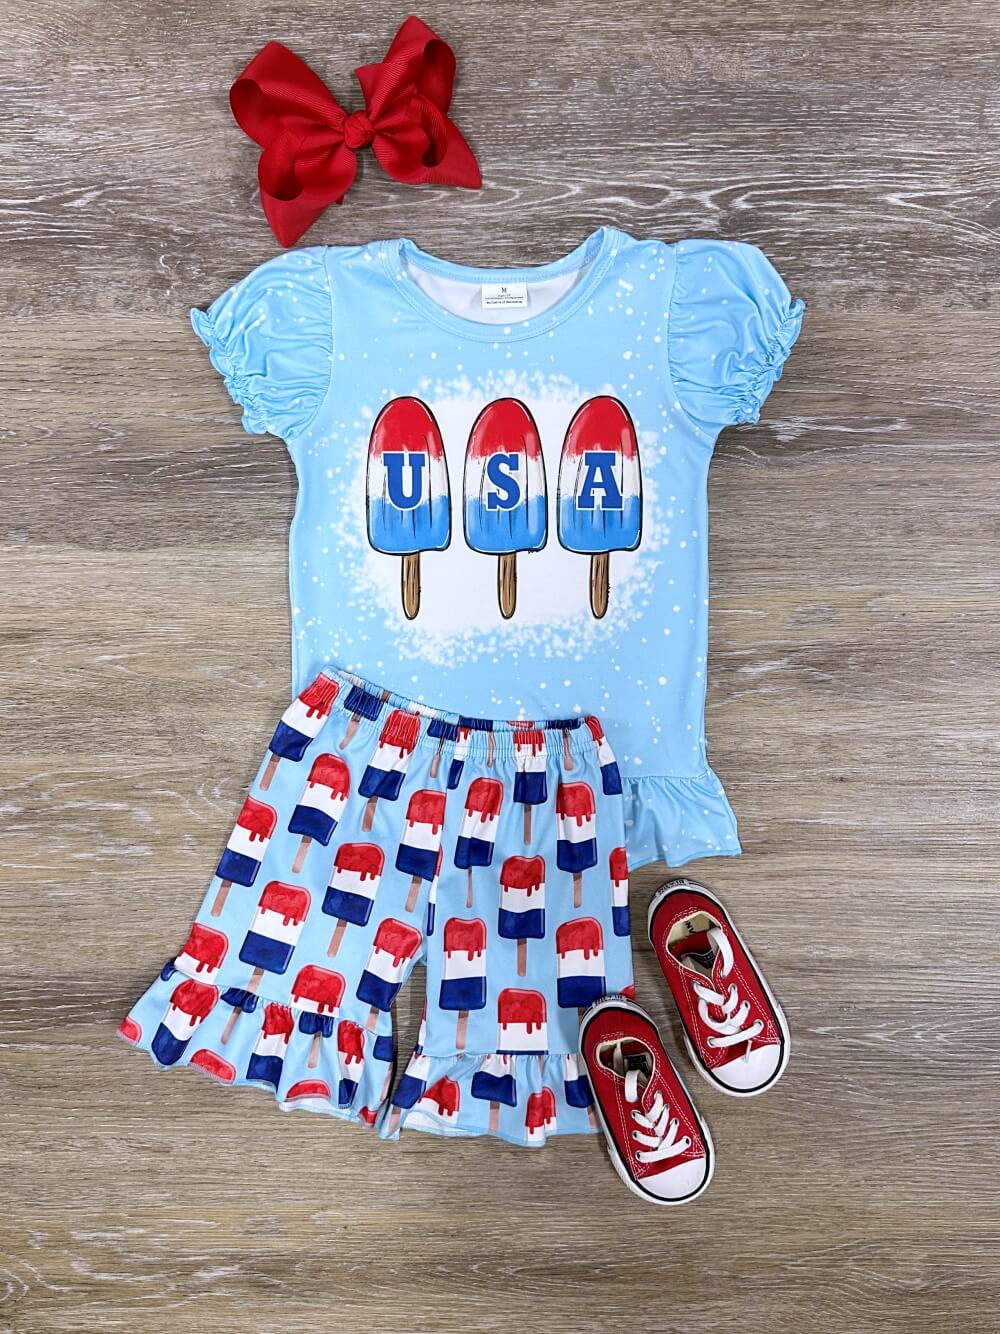 USA Bomb Pop Puff Sleeve Girls Patriotic Shorts Outfit - Sydney So Sweet